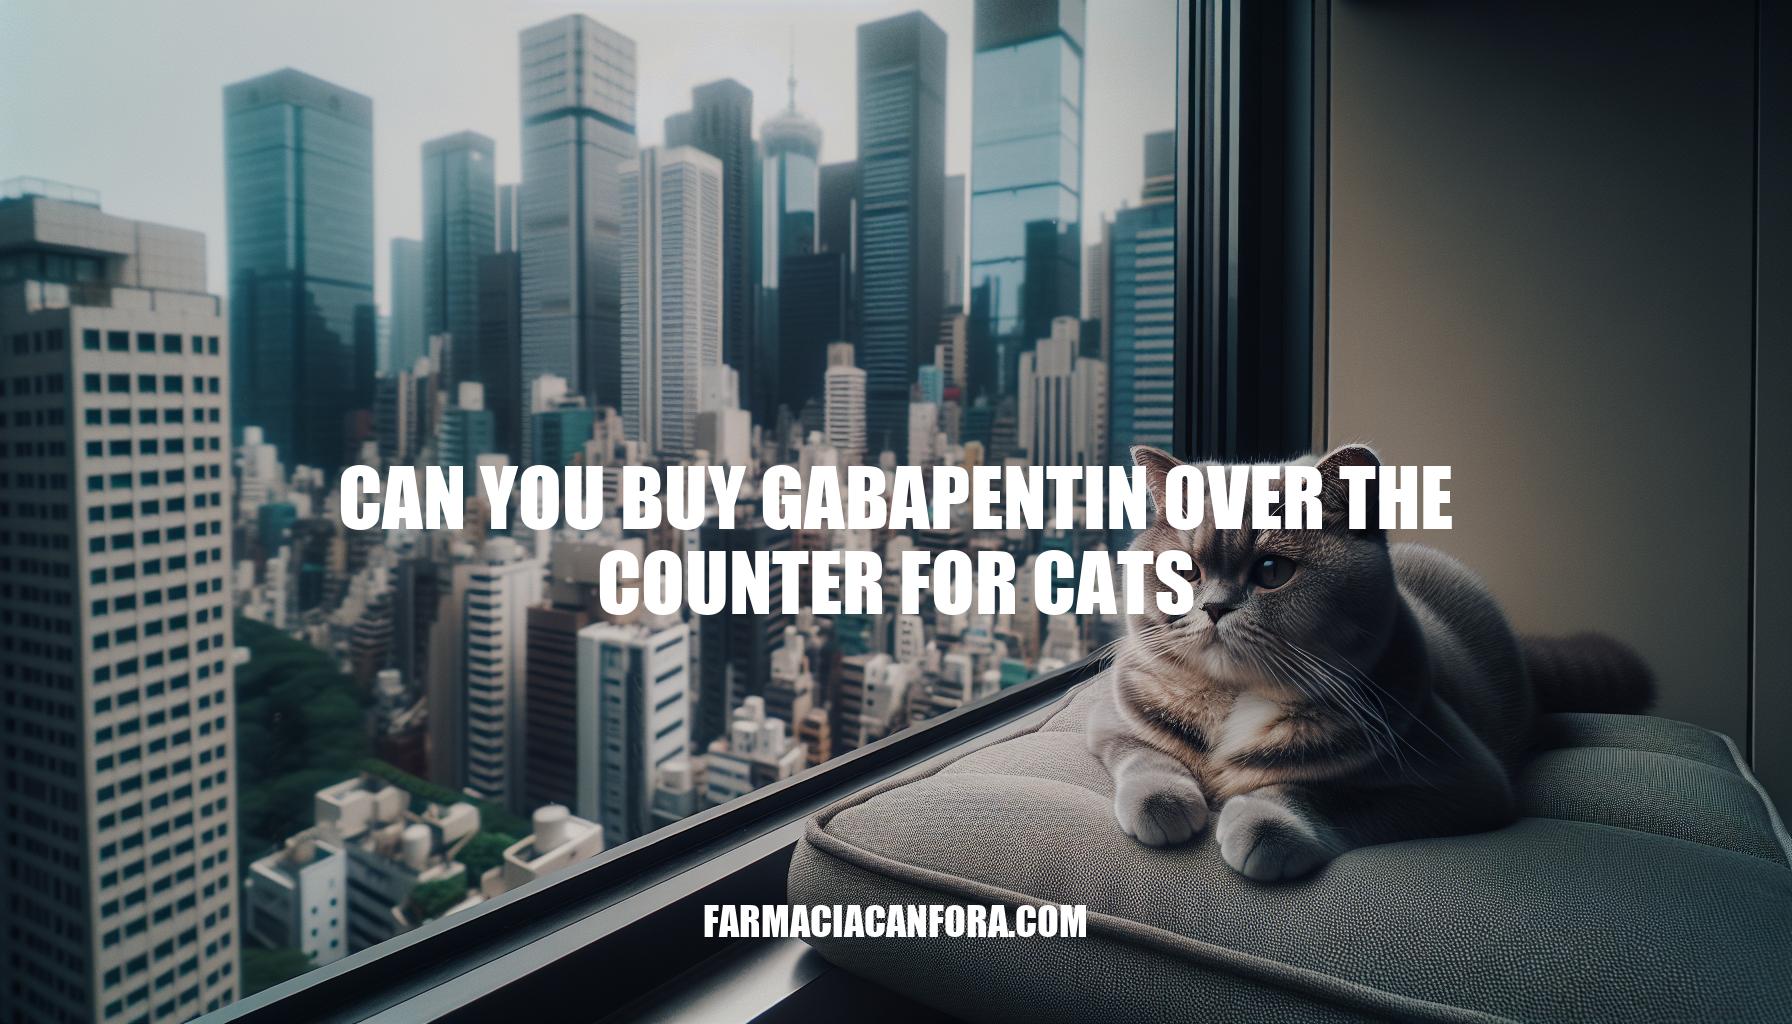 Can You Buy Gabapentin Over the Counter for Cats: Regulations and Considerations